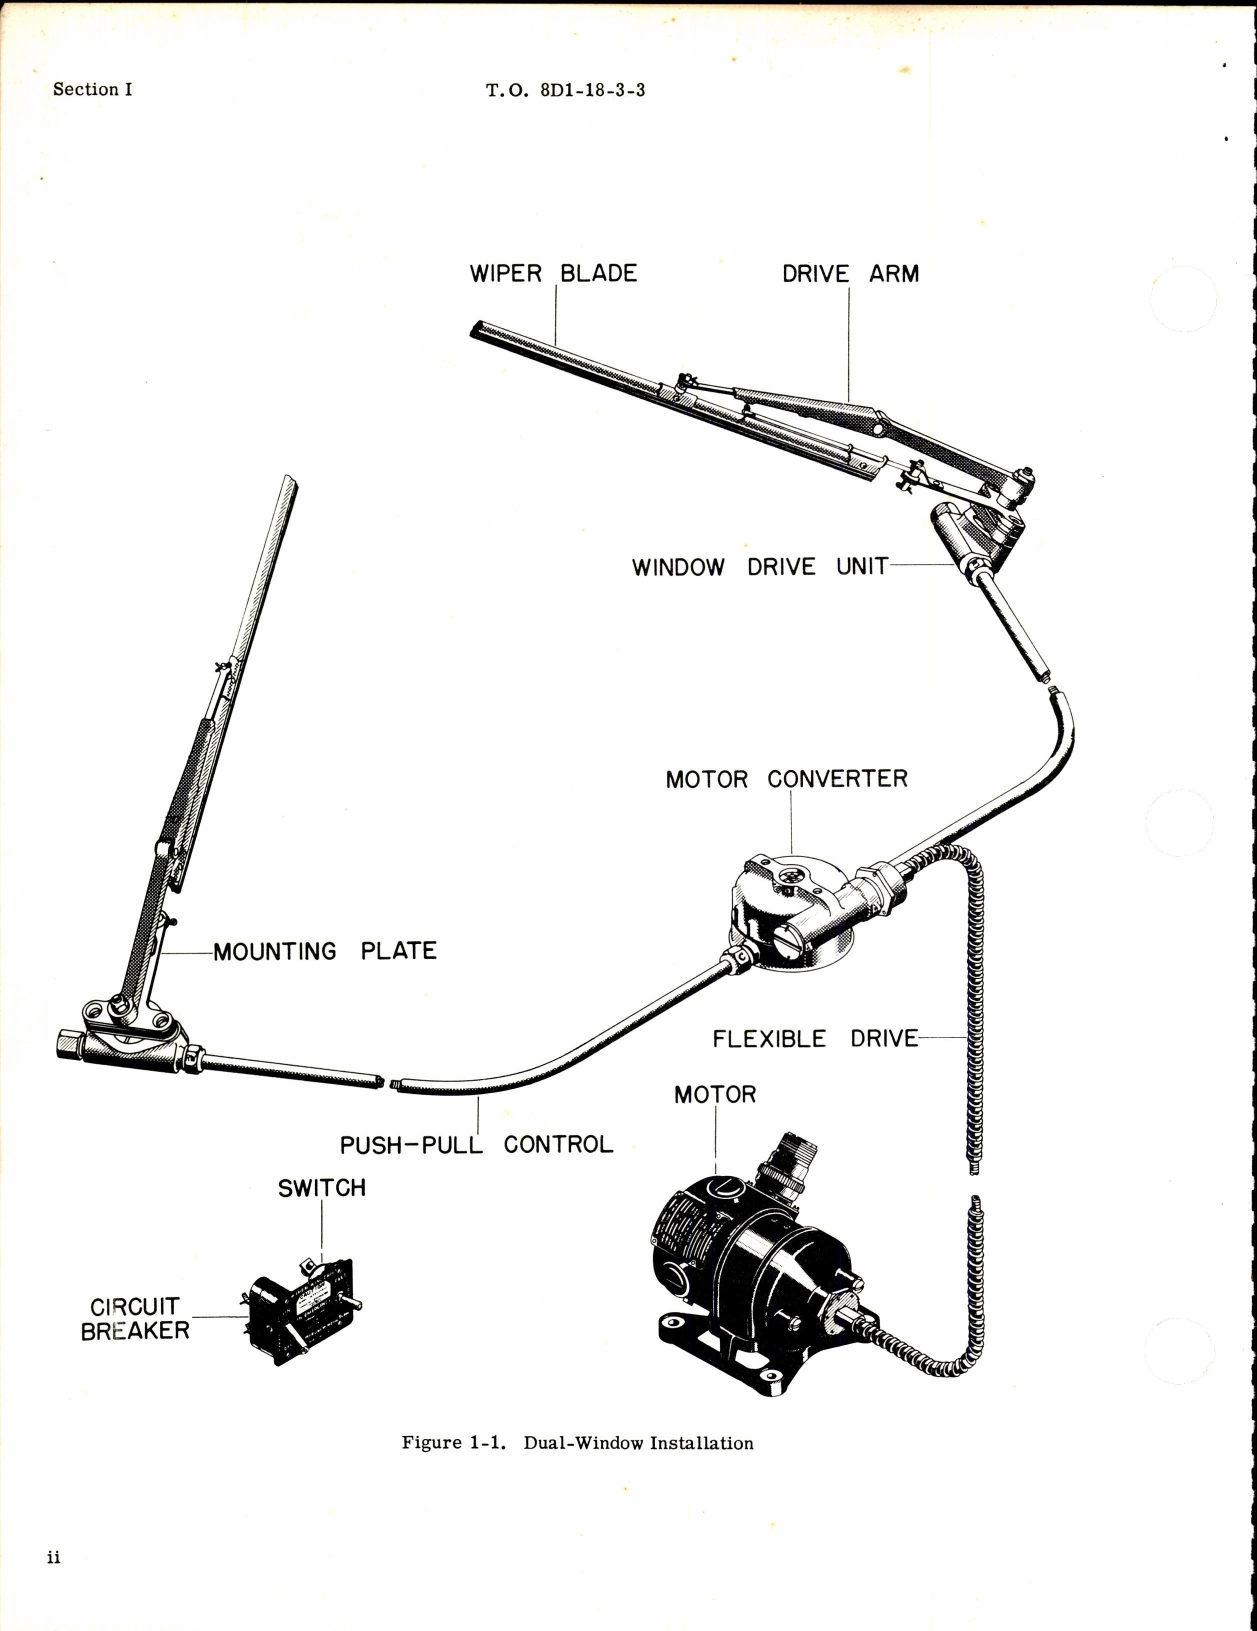 Sample page 4 from AirCorps Library document: Handbook of Overhaul Instructions for Electric Windshield Wipers